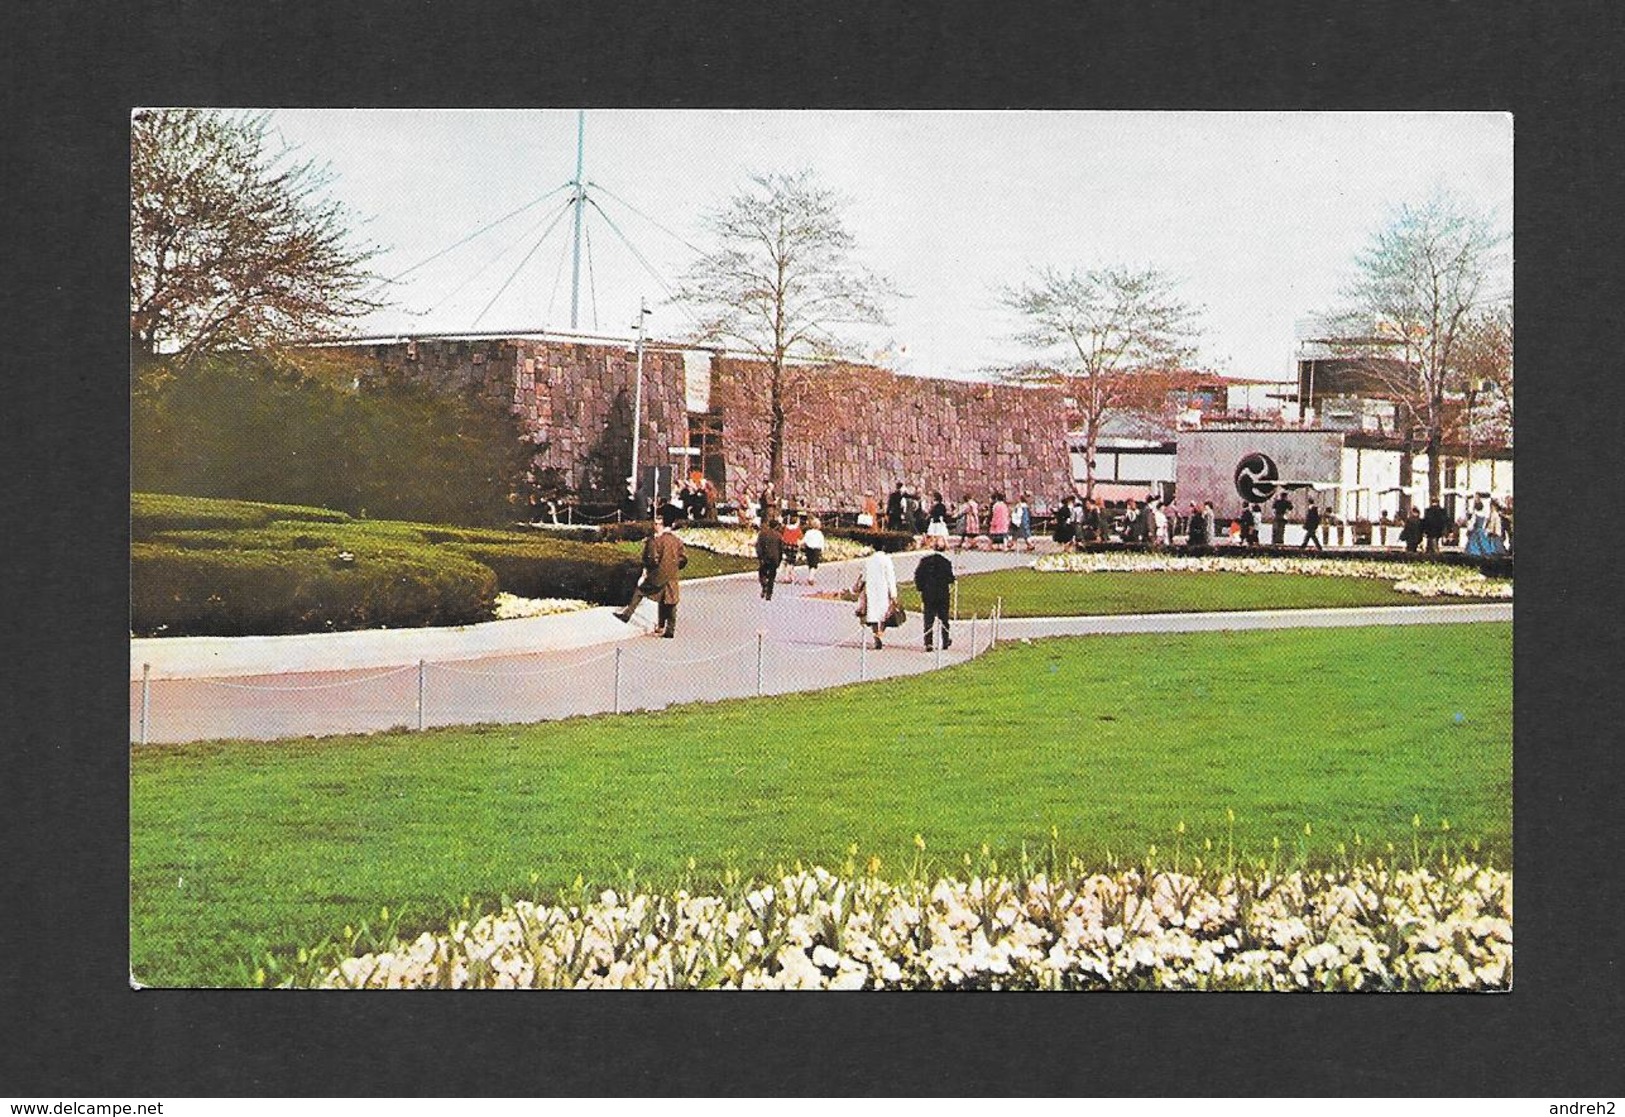 EXPOSITIONS - NEW YORK WORLD'S FAIR 1964-65 - THE JAPAN PAVILION - Exhibitions